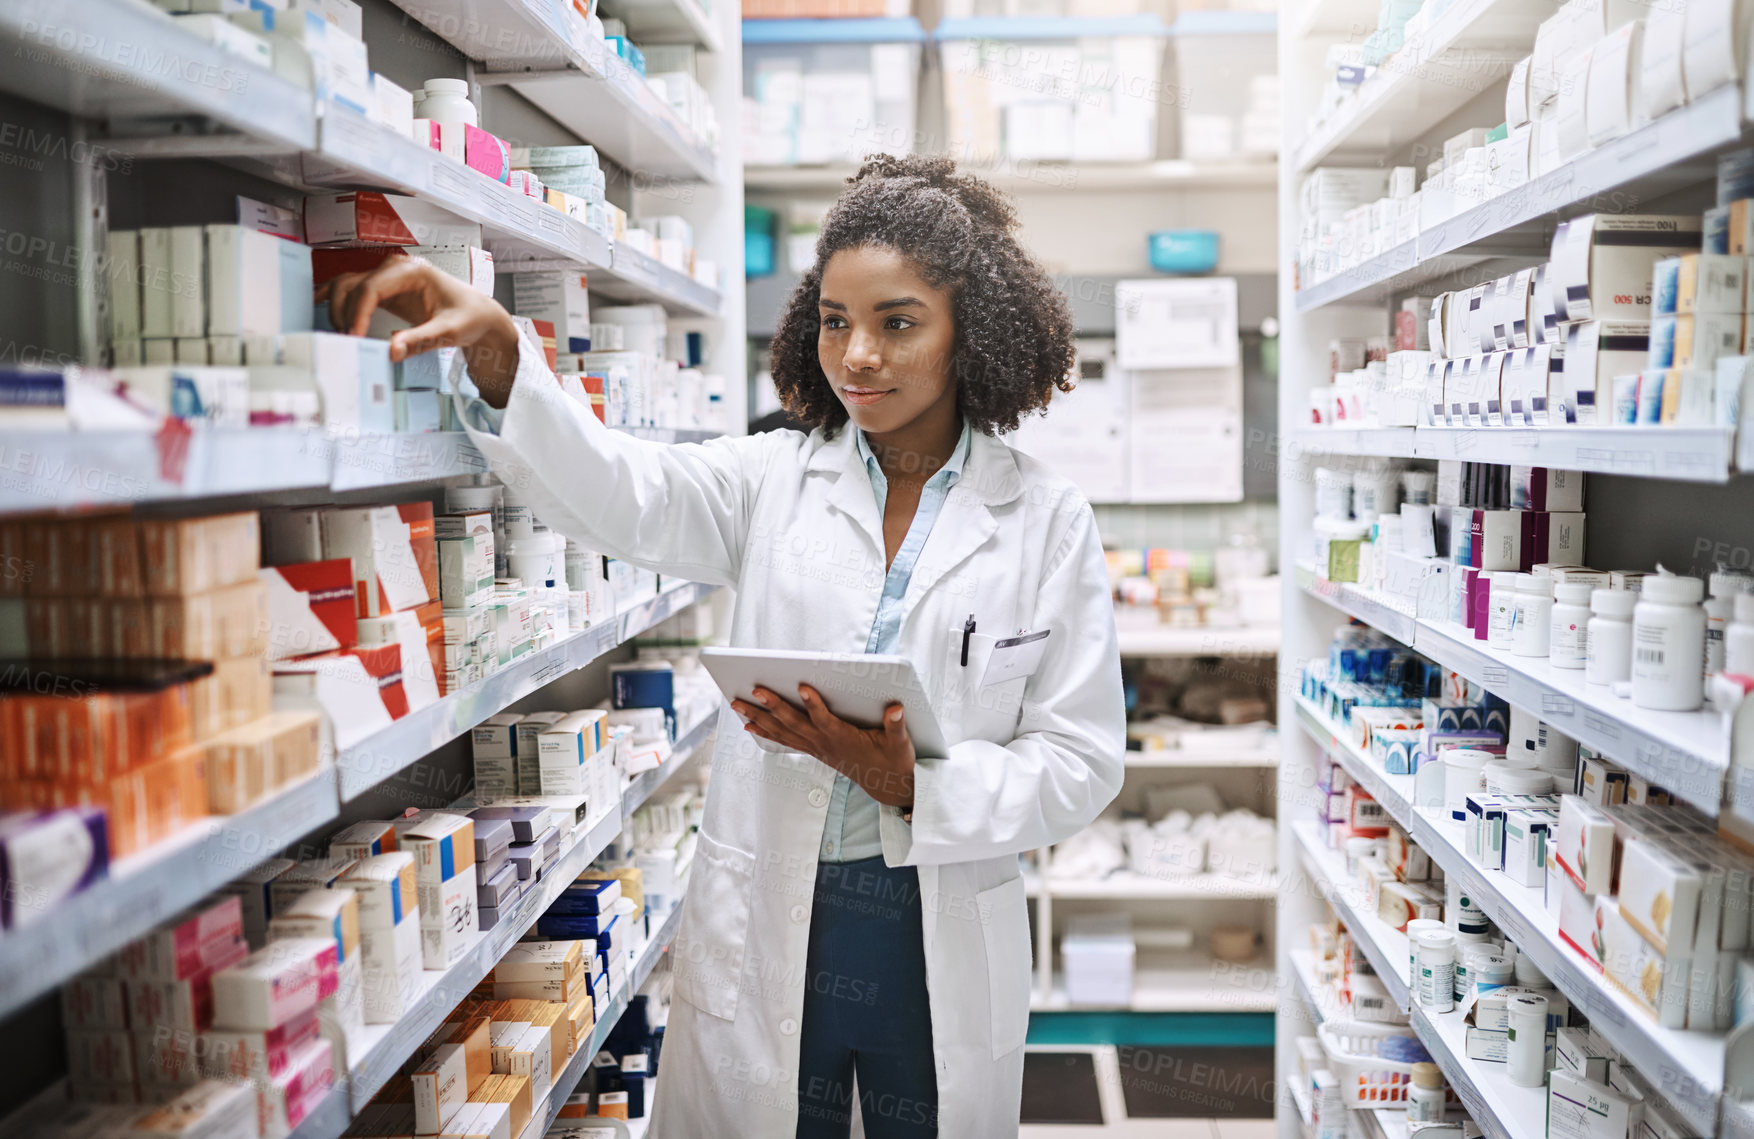 Buy stock photo Cropped shot of an attractive young female pharmacist working in a pharmacy